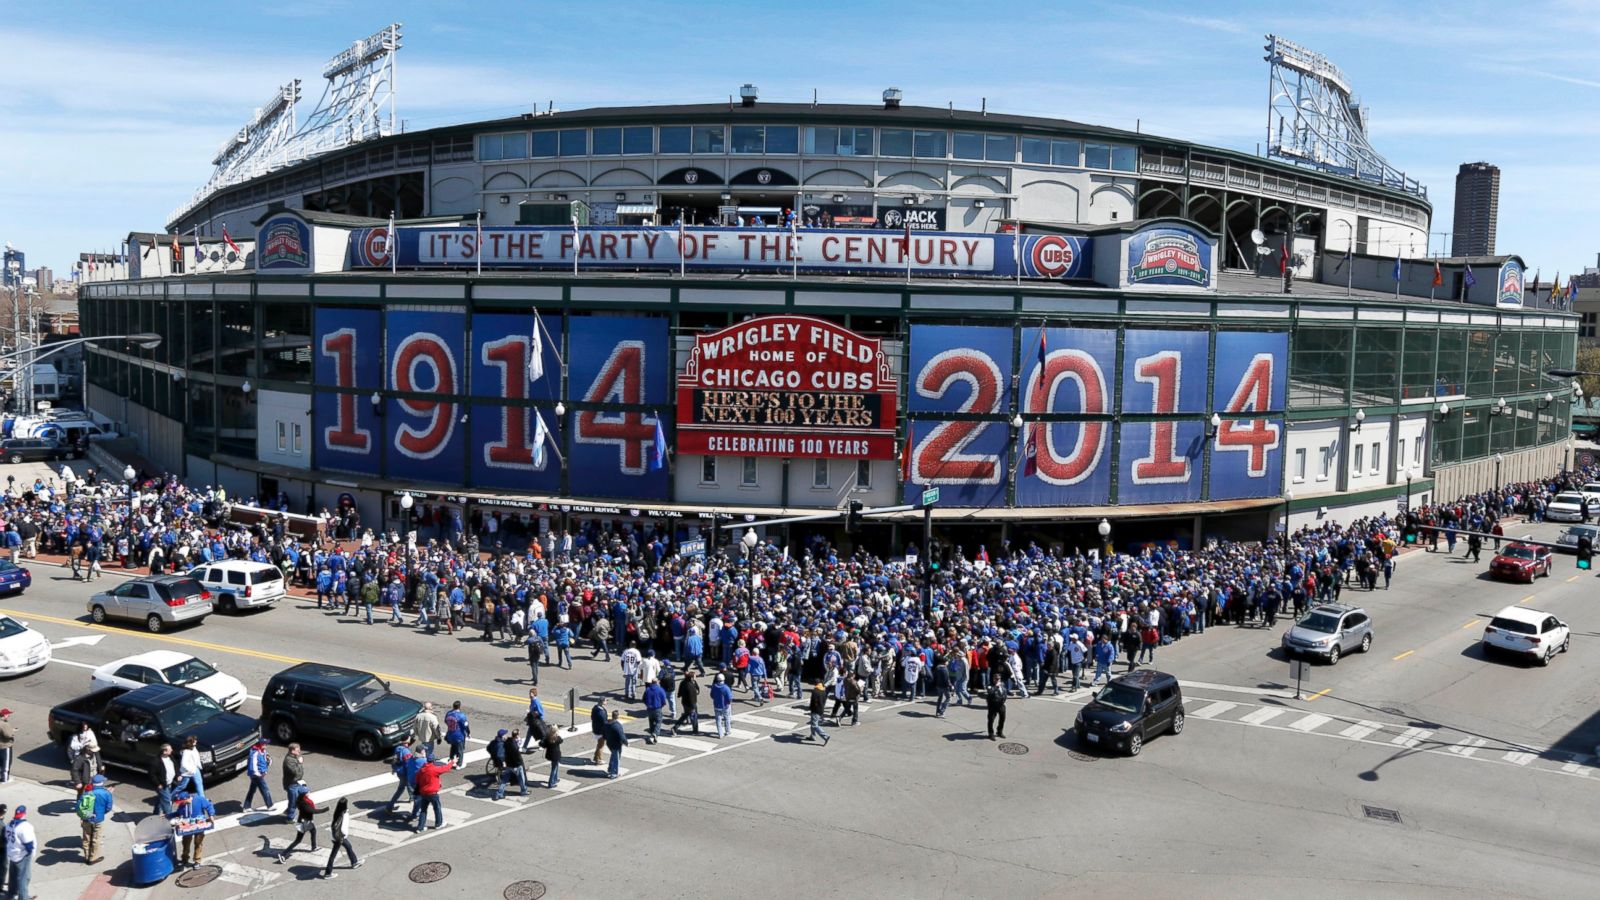 Looking Back: 100 Years at Wrigley Field